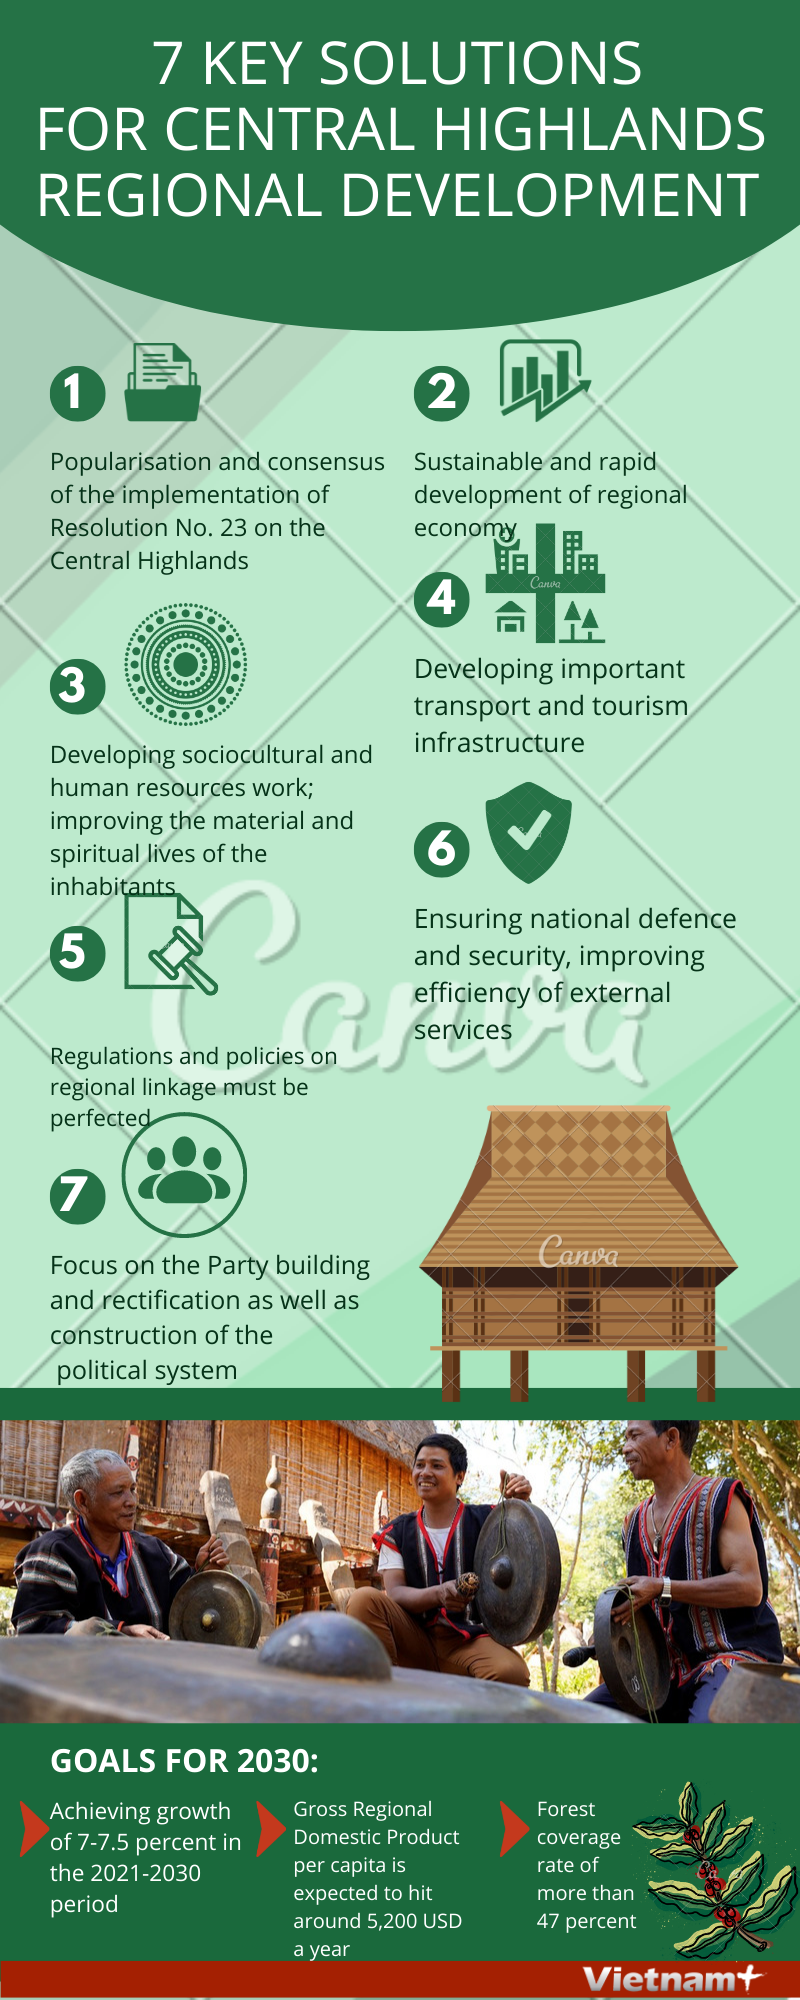 Seven key solutions for central highlands regional development hinh anh 1